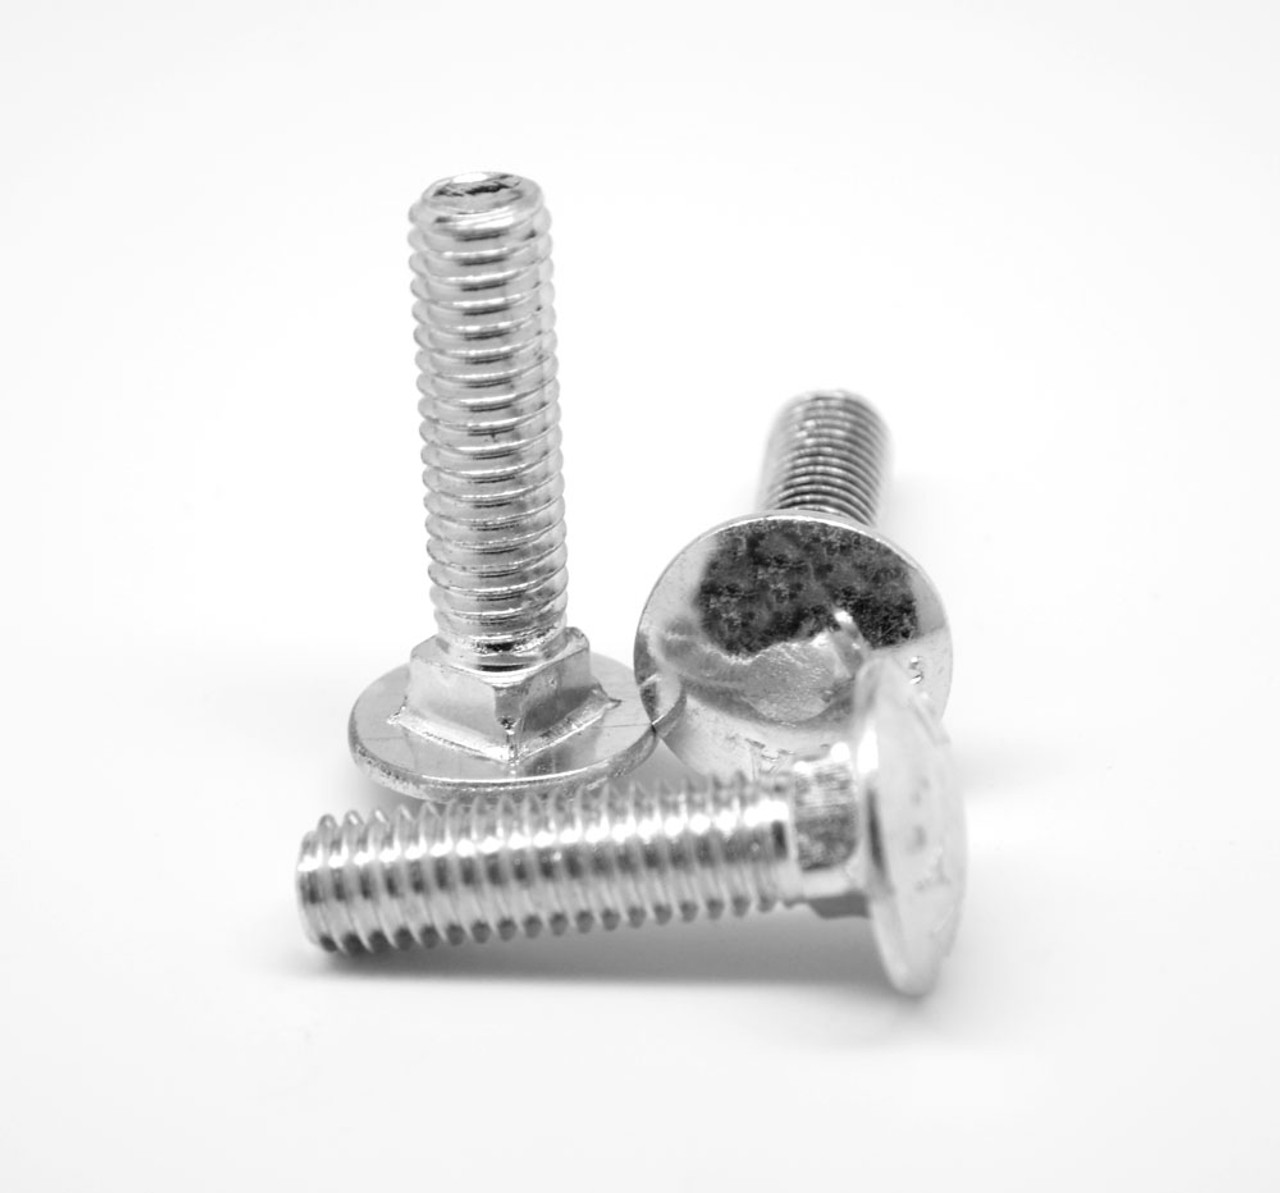 5/16"-18 x 2 1/2" (FT) Coarse Thread A307 Grade A Carriage Bolt Low Carbon Steel Zinc Plated